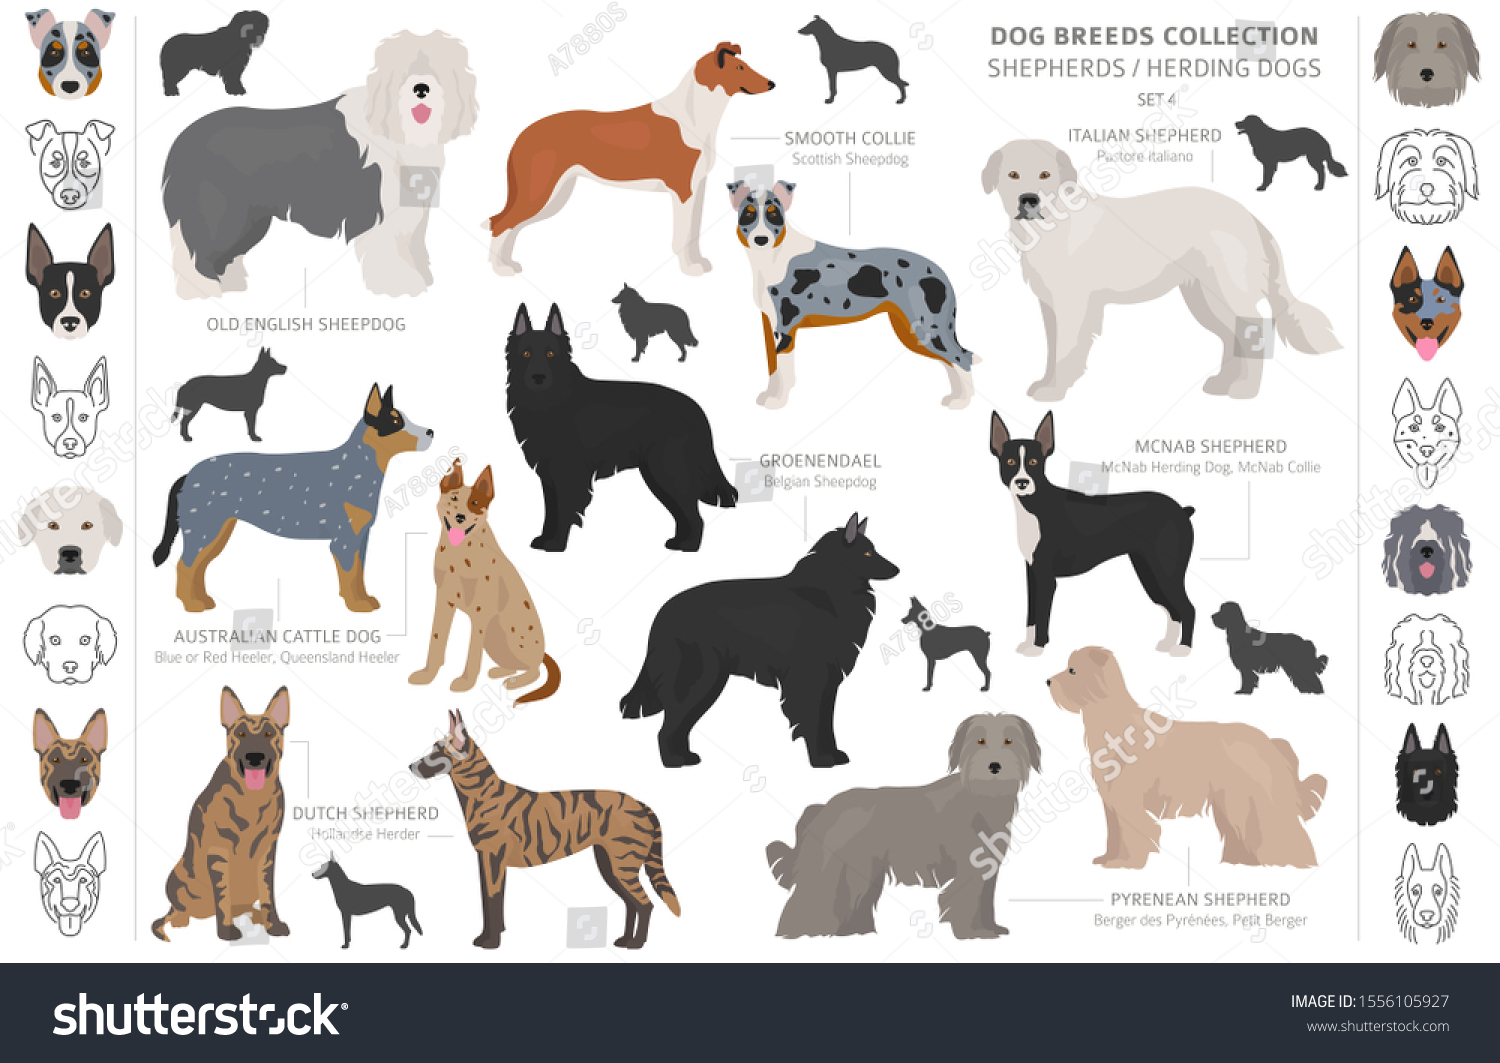 SVG of Shepherd and herding dogs collection isolated on white. Flat style. Different color and country of origin. Vector illustration svg